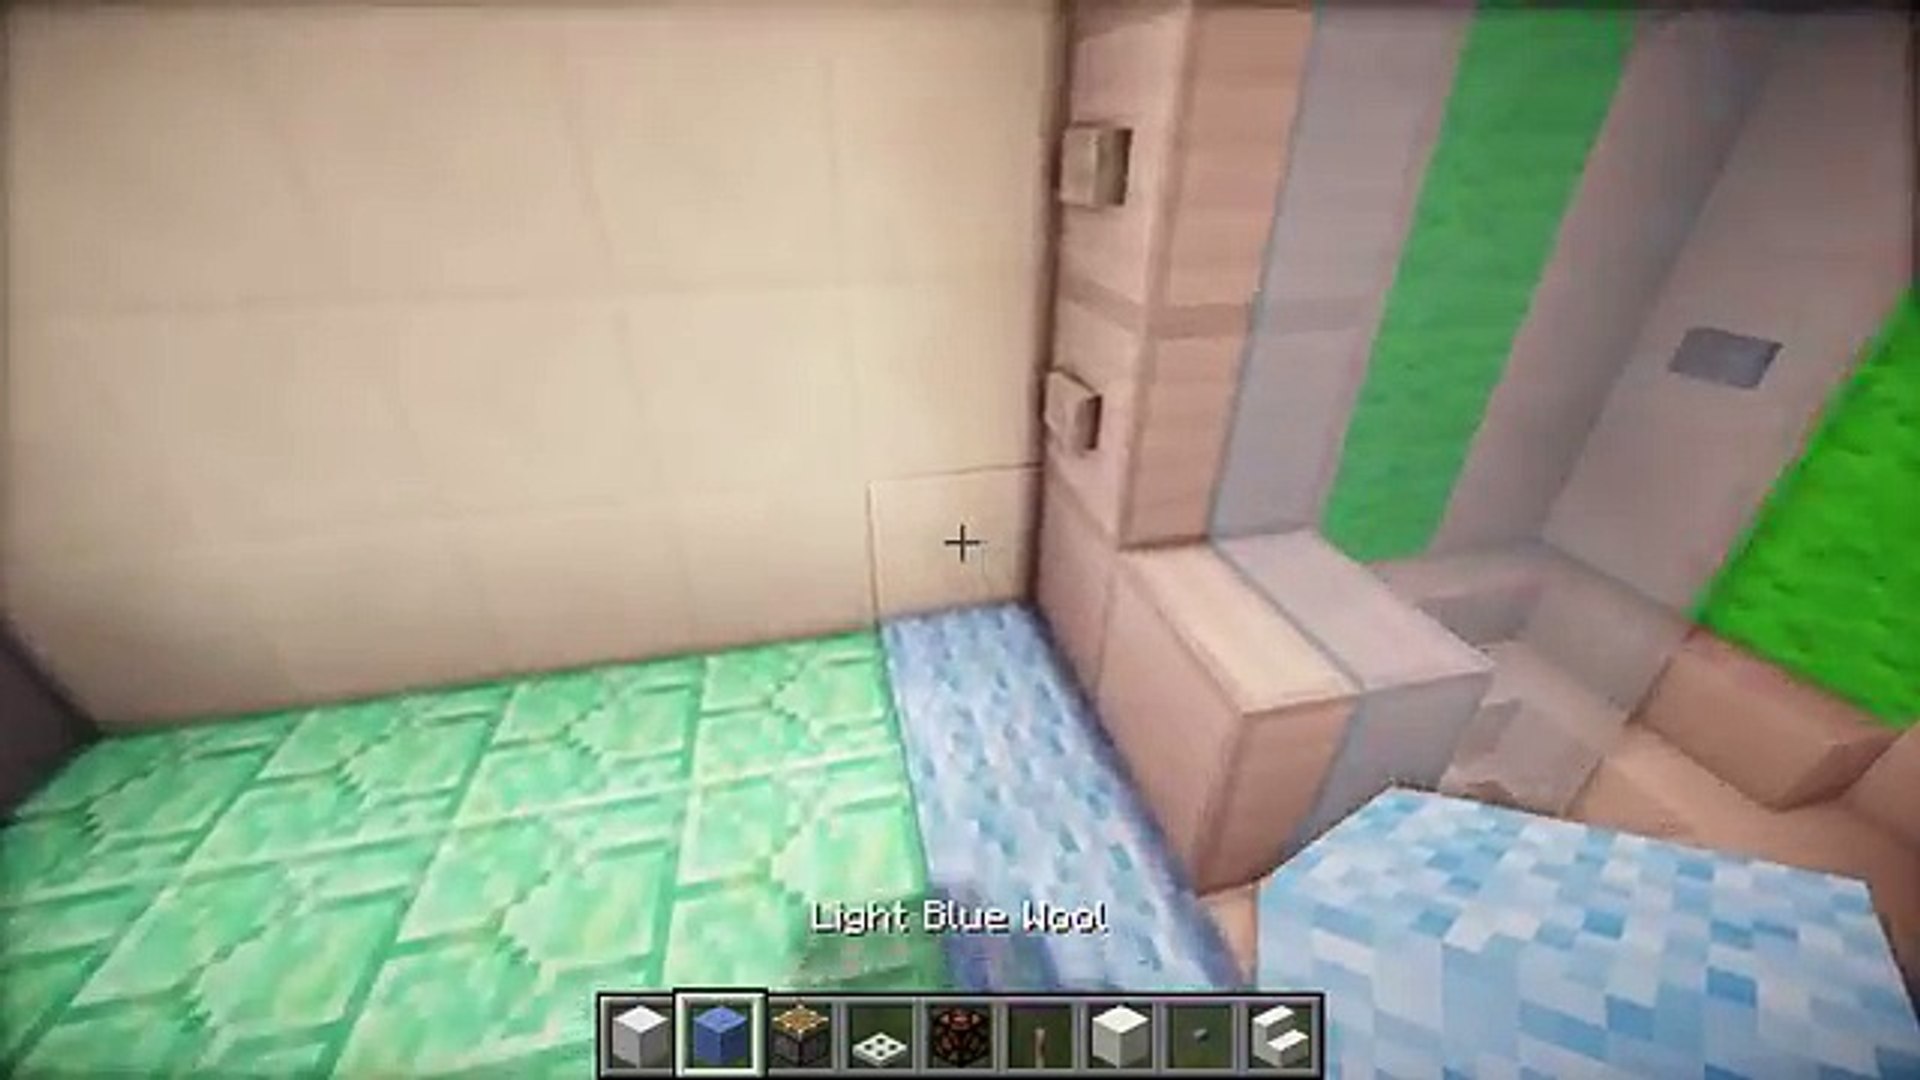 Minecraft: How to Make a Working Shower - Bathroom Tutorial for House